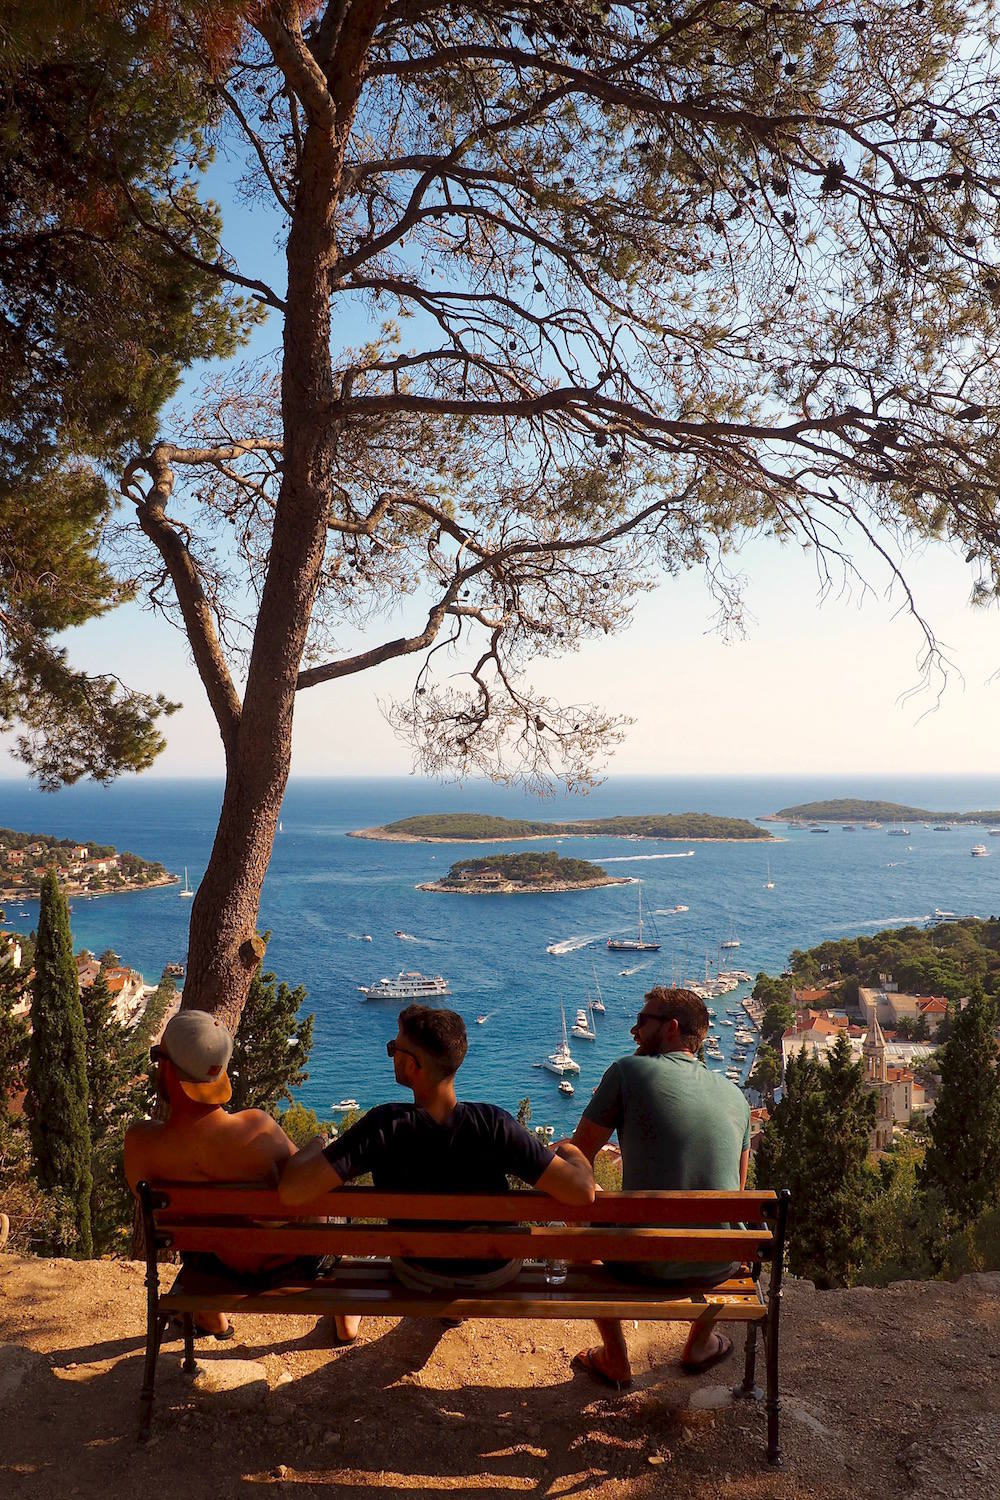 View from Spanish Fortress in Hvar